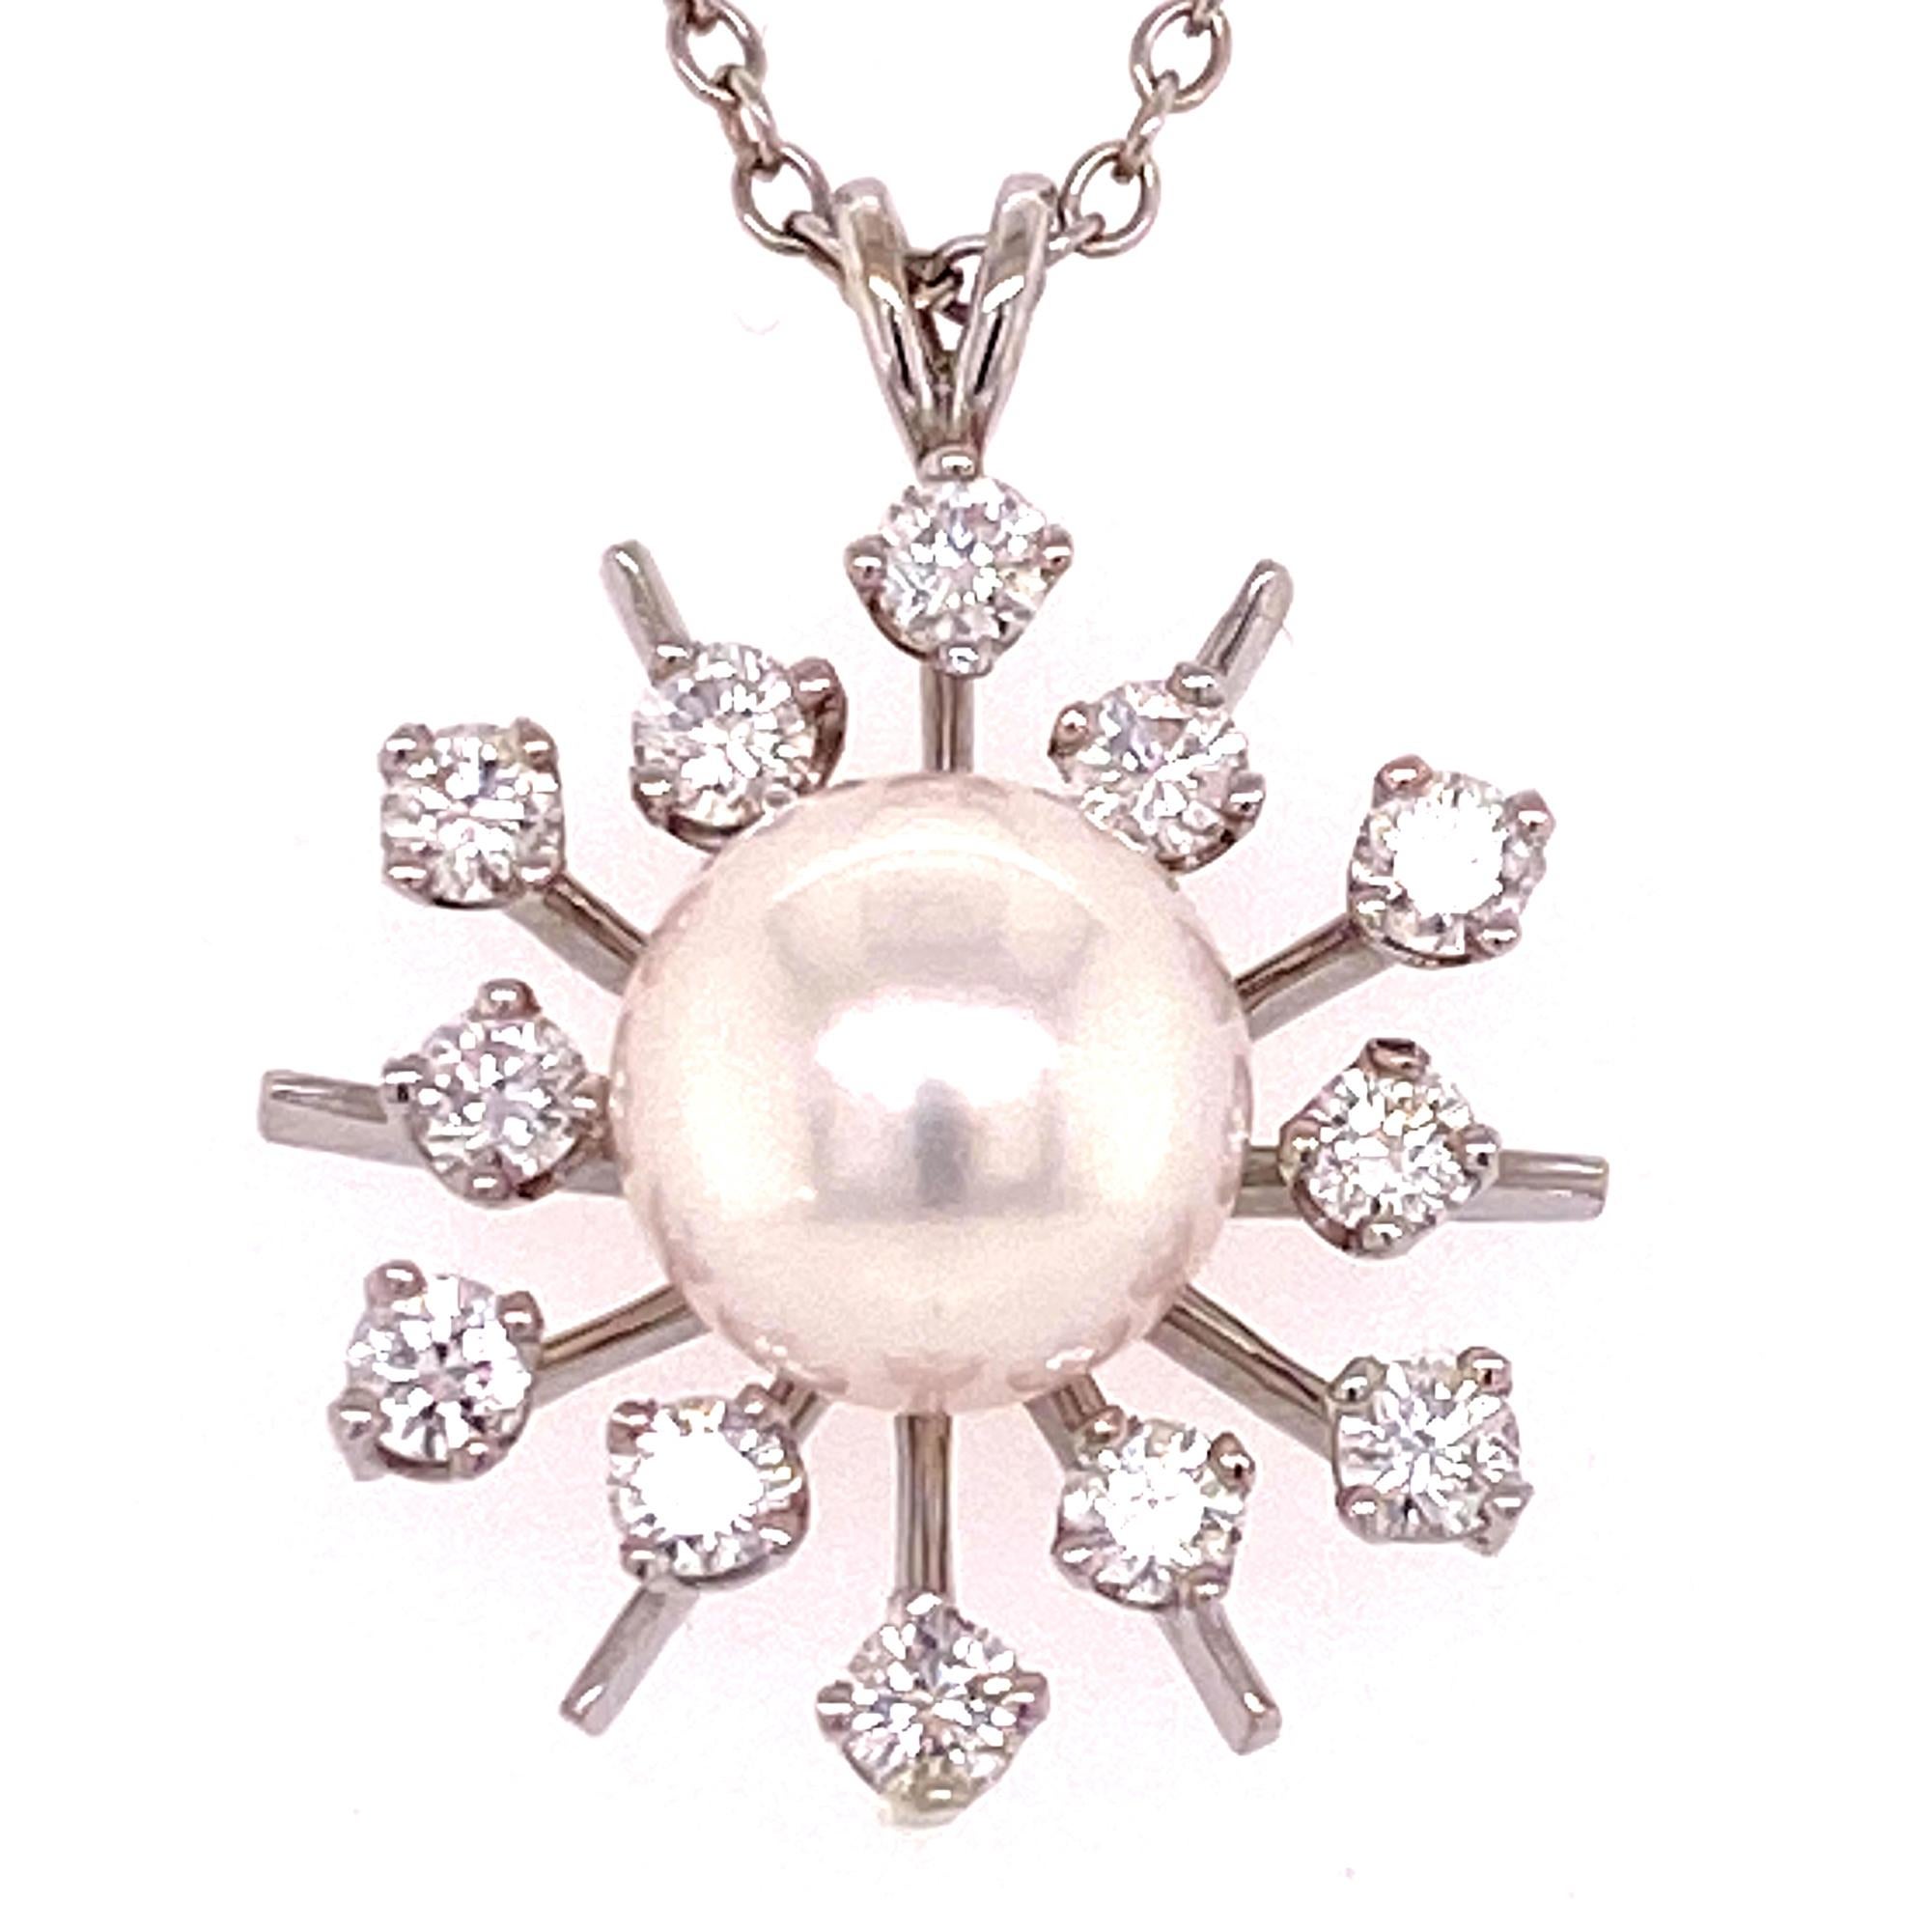 Beautiful starburst diamond cultured pearl pendant fashioned in 14 karat white gold. The round brilliant cut diamonds weigh approximately .50 carat total weight and are graded F-G color and VS clarity. The pendant measures .75 x .75 inches and the